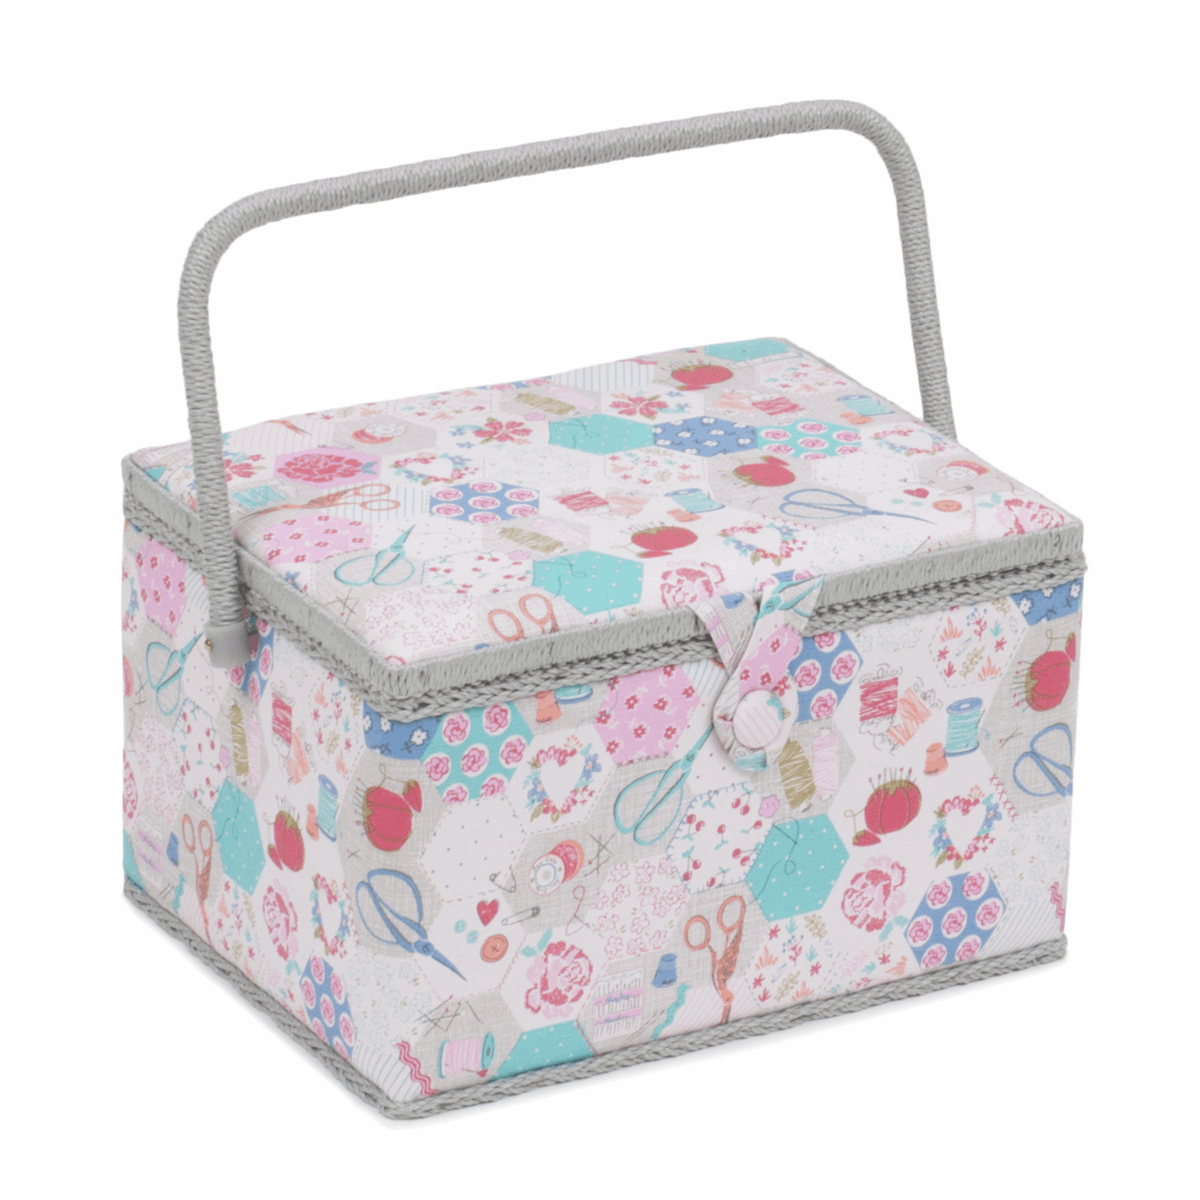 Notions Sewing Box - Large